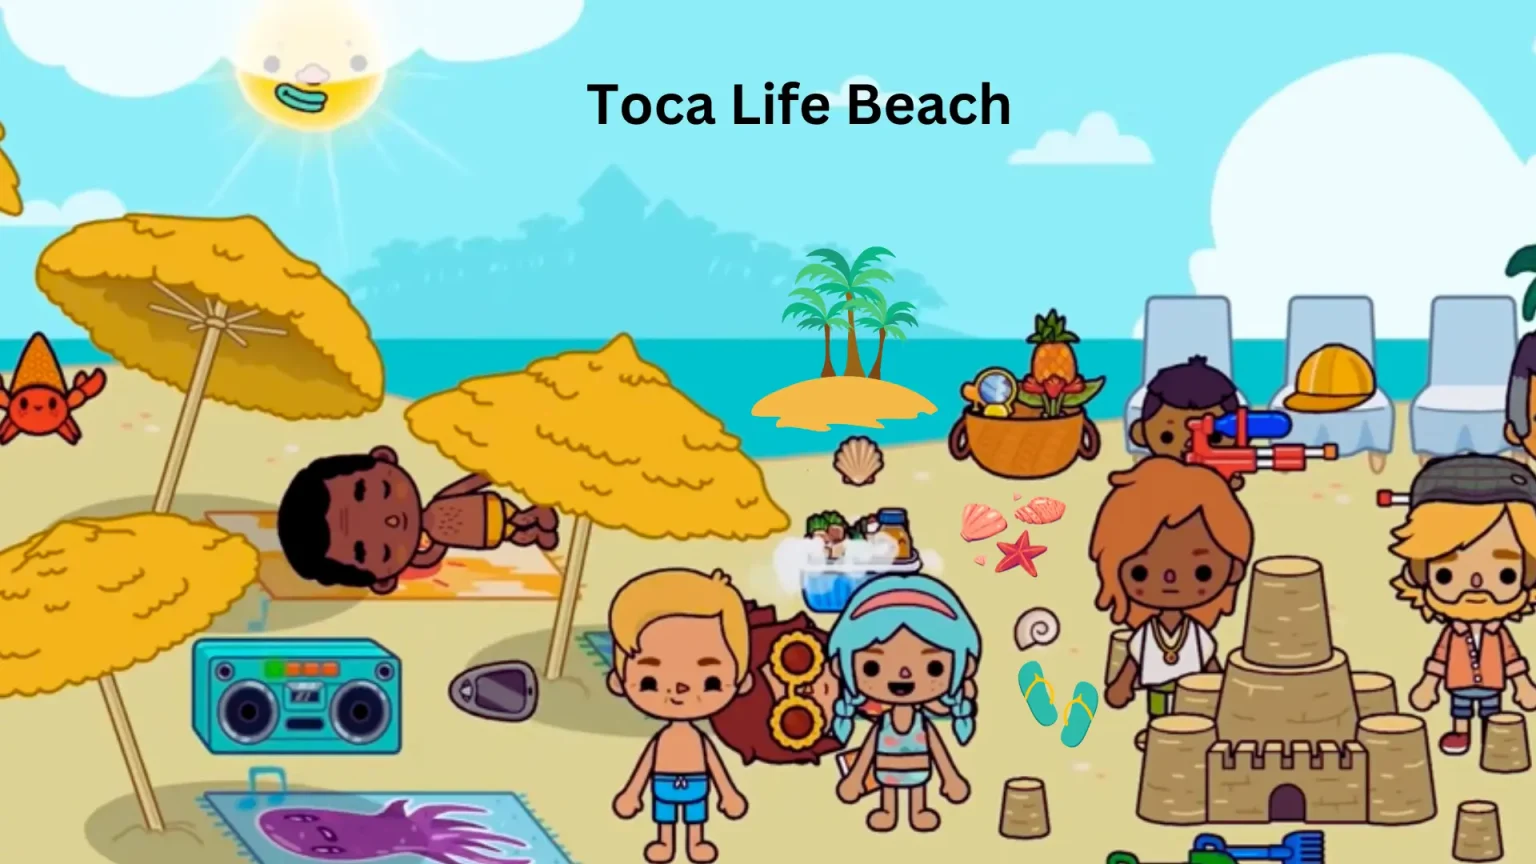 Toca Life Beach story build in toca life world